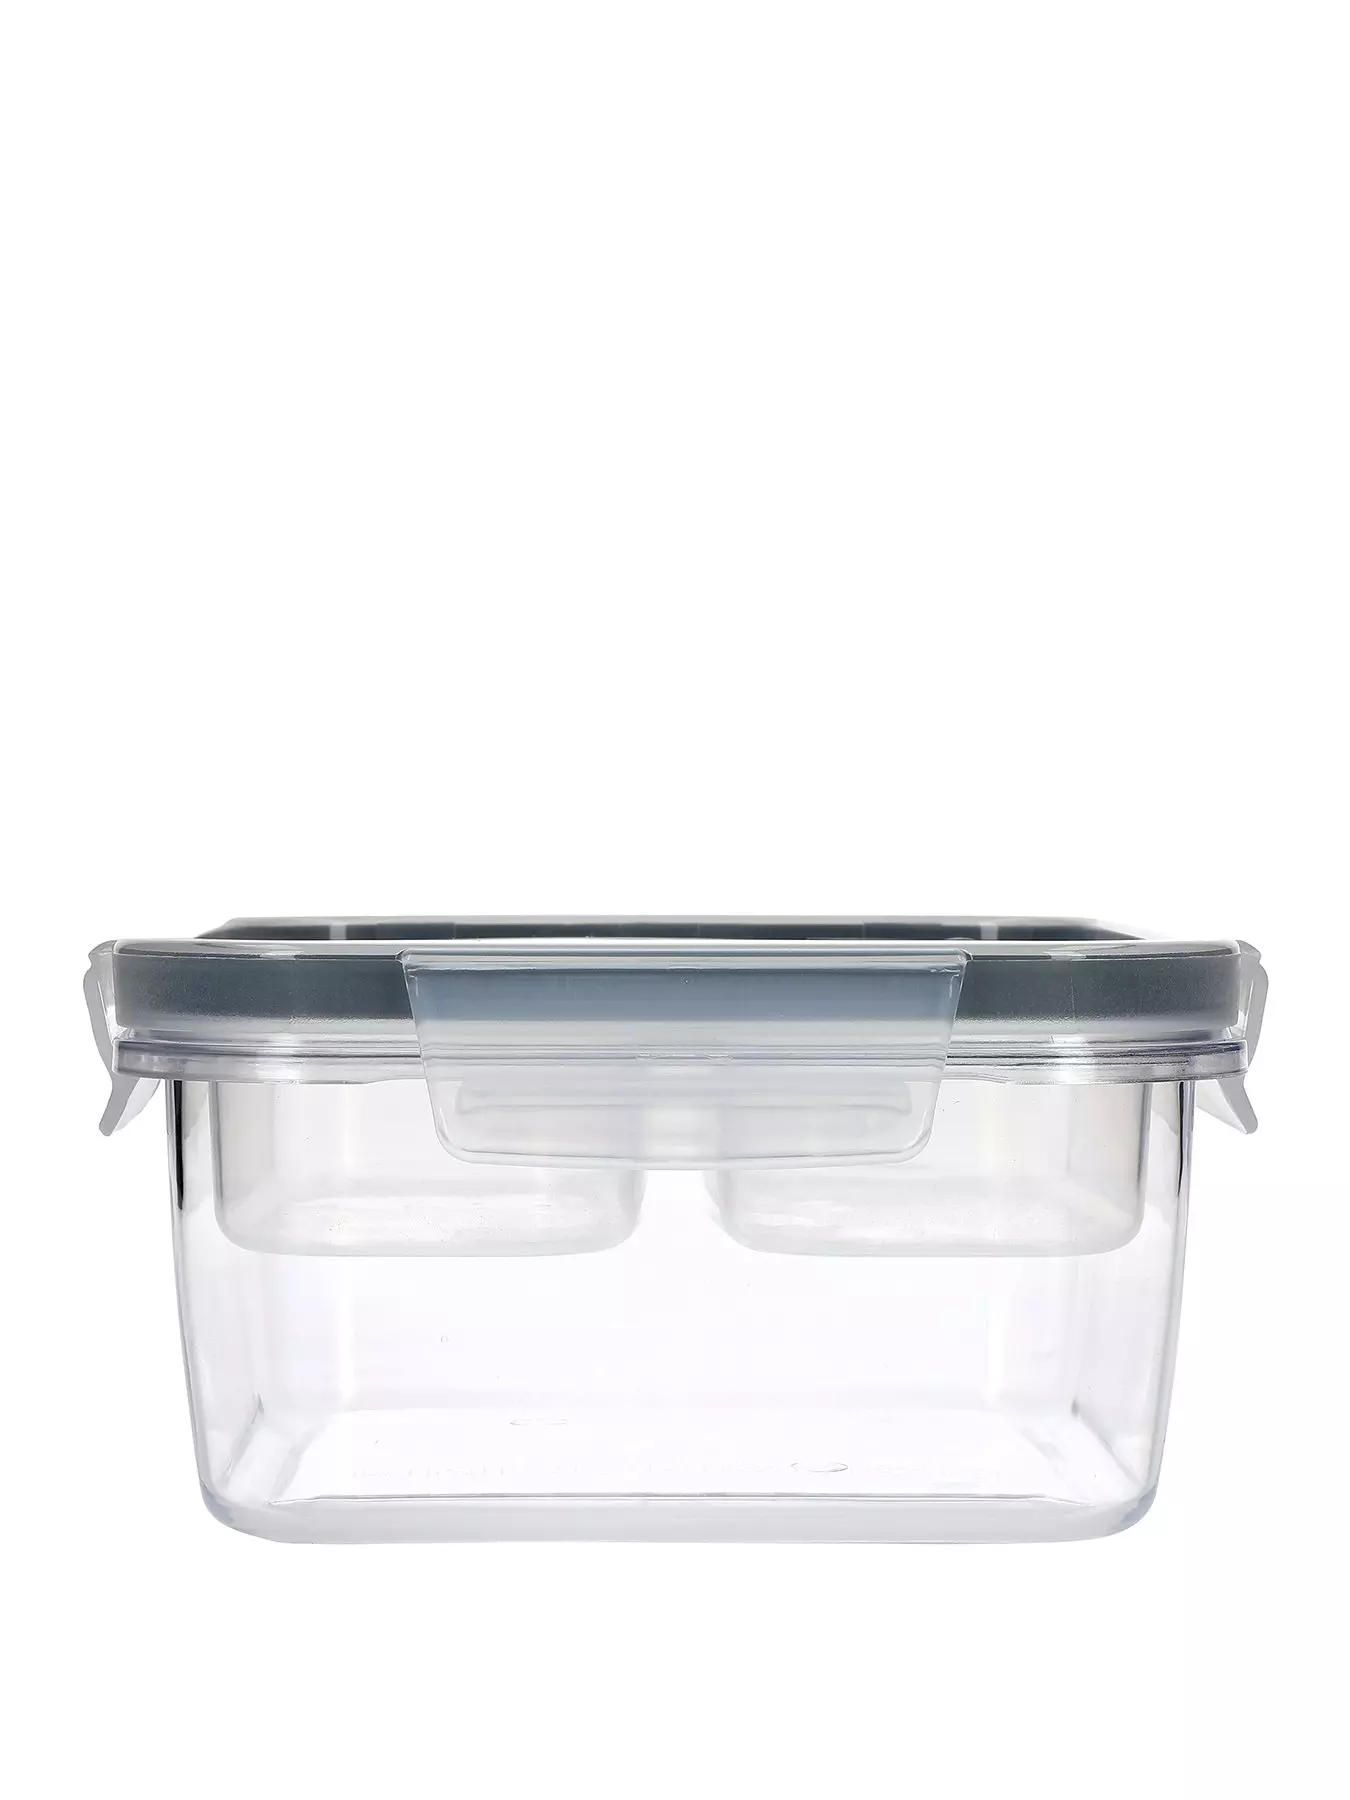 https://media.very.co.uk/i/very/V7NF9_SQ1_0000000647_CLEAR_SLf/masterclass-snap-food-storage-container.jpg?$180x240_retinamobilex2$&$roundel_very$&p1_img=sale_2017&fmt=webp